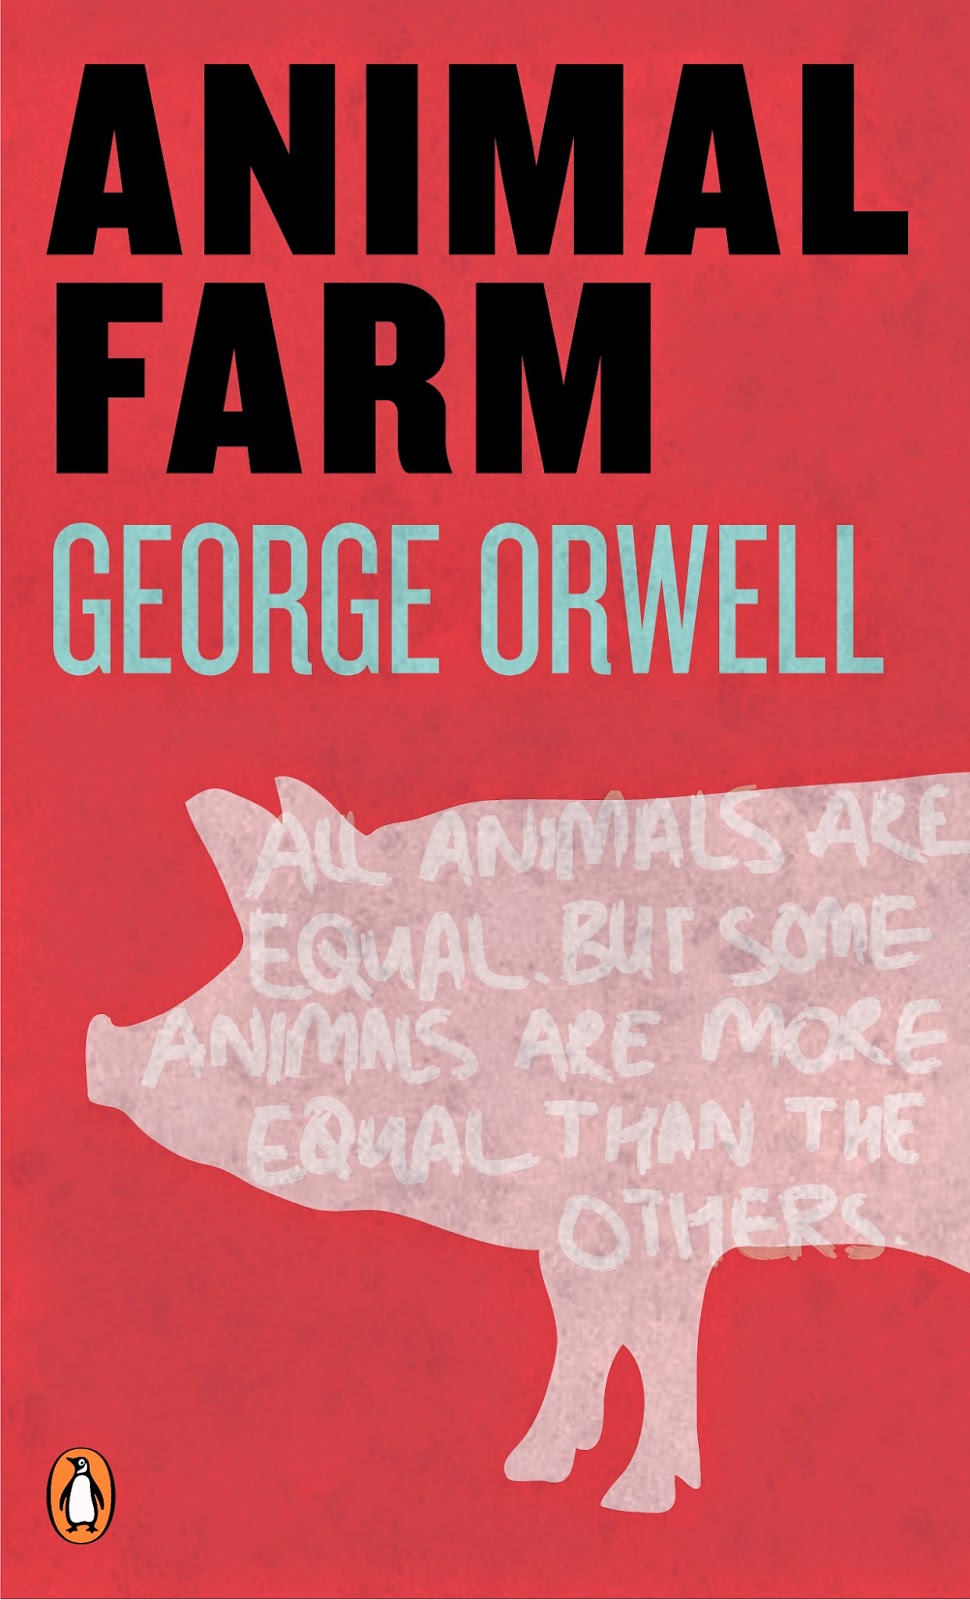 10 Books You Have To Read - Animal Farm, by George Orwell